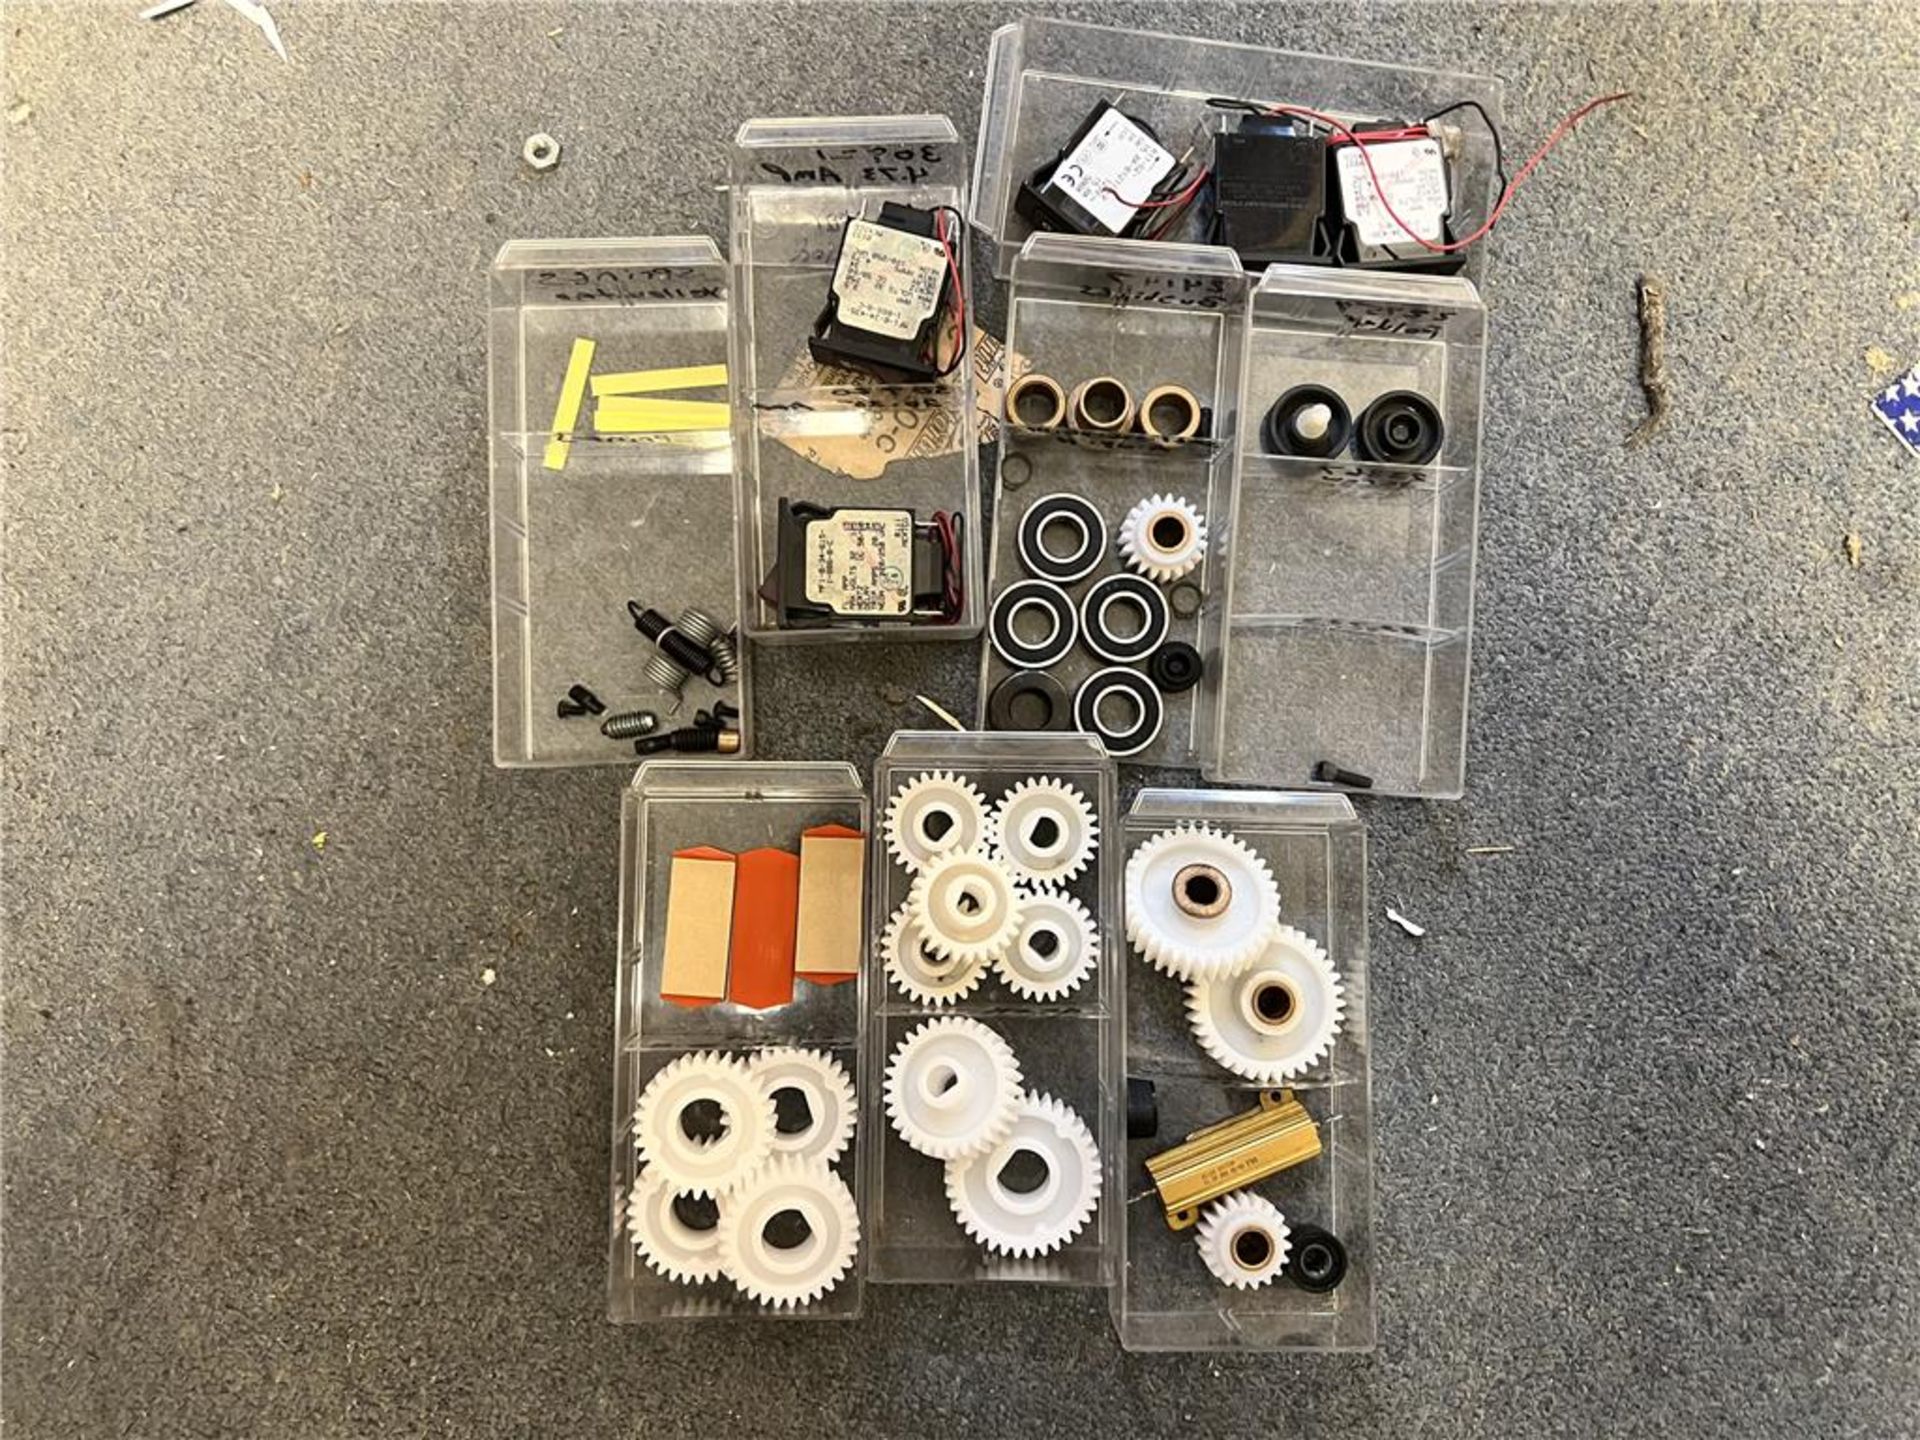 LOT OF ASSORTED PARTS CABINETS WITH CONTENTS: BELL & HOWELL INSERTER & BAUM TABLETOP FOLDER PARTS - Image 2 of 4